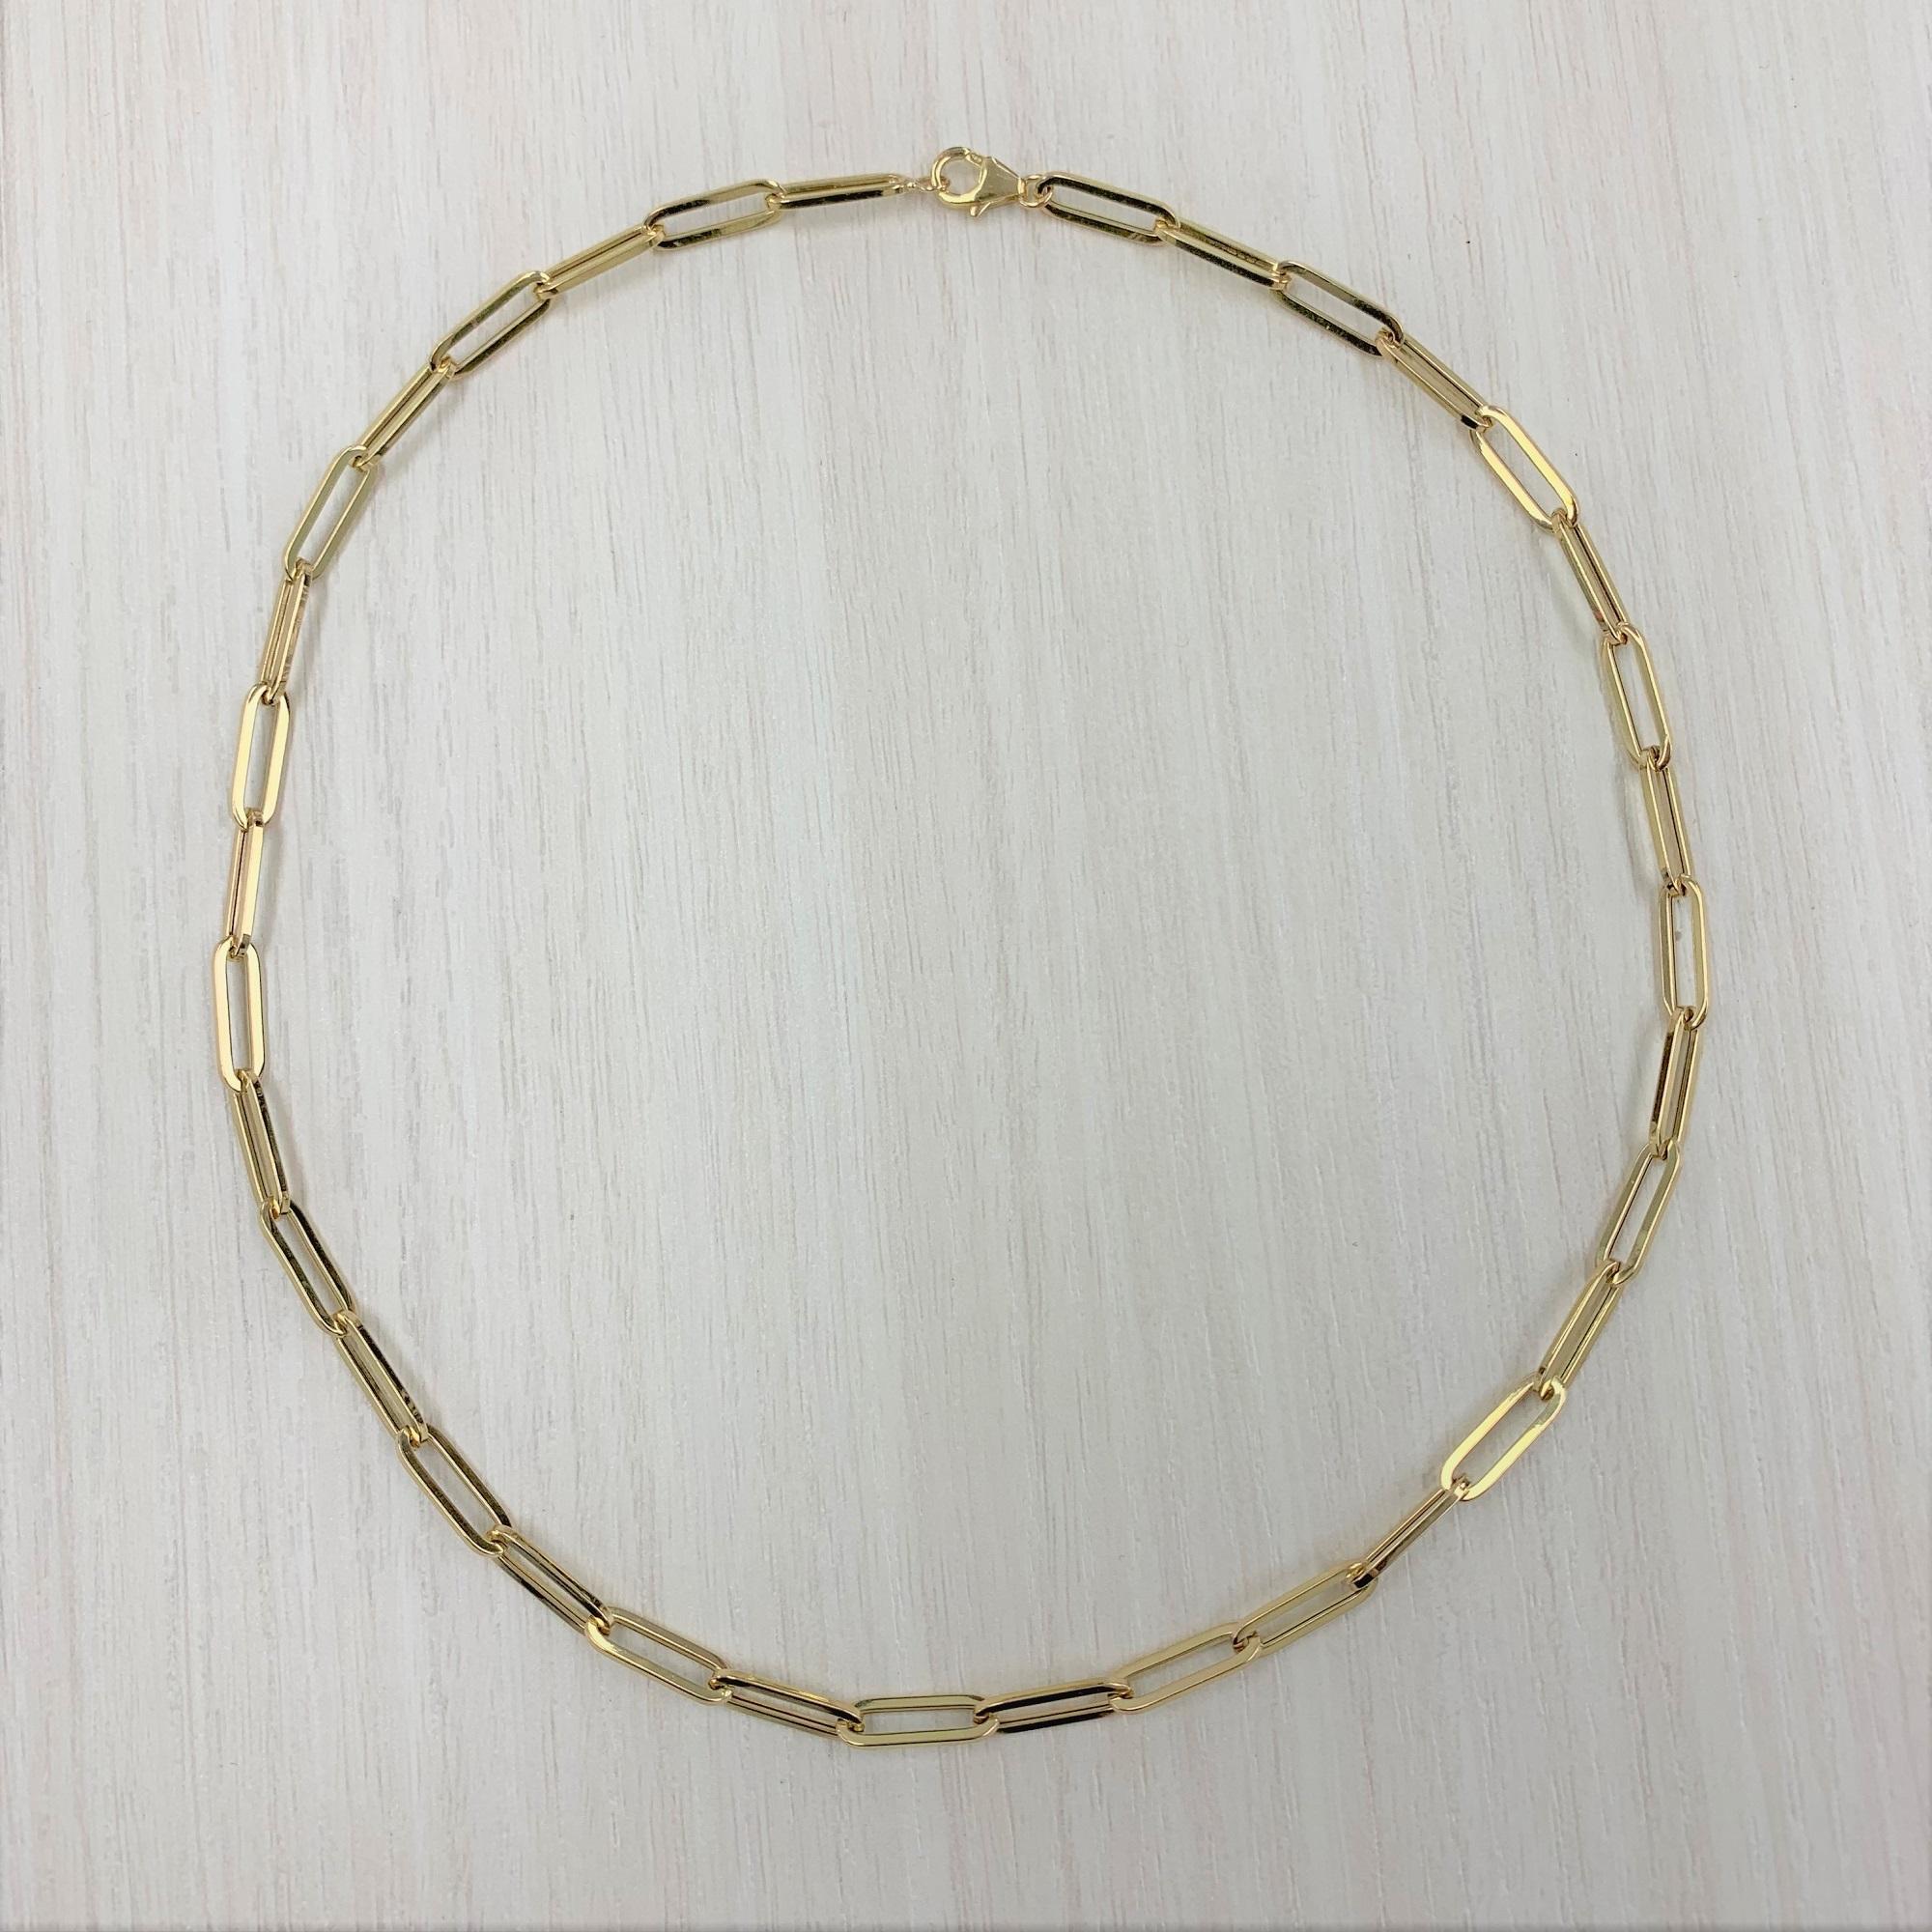  Chain necklaces are a classic staple in any person's jewelry box!  This 14k yellow gold paper-clip medium link chain comes with plenty of options, specifically your choice of length. Buy one and wear it as a simple standalone (with or without a